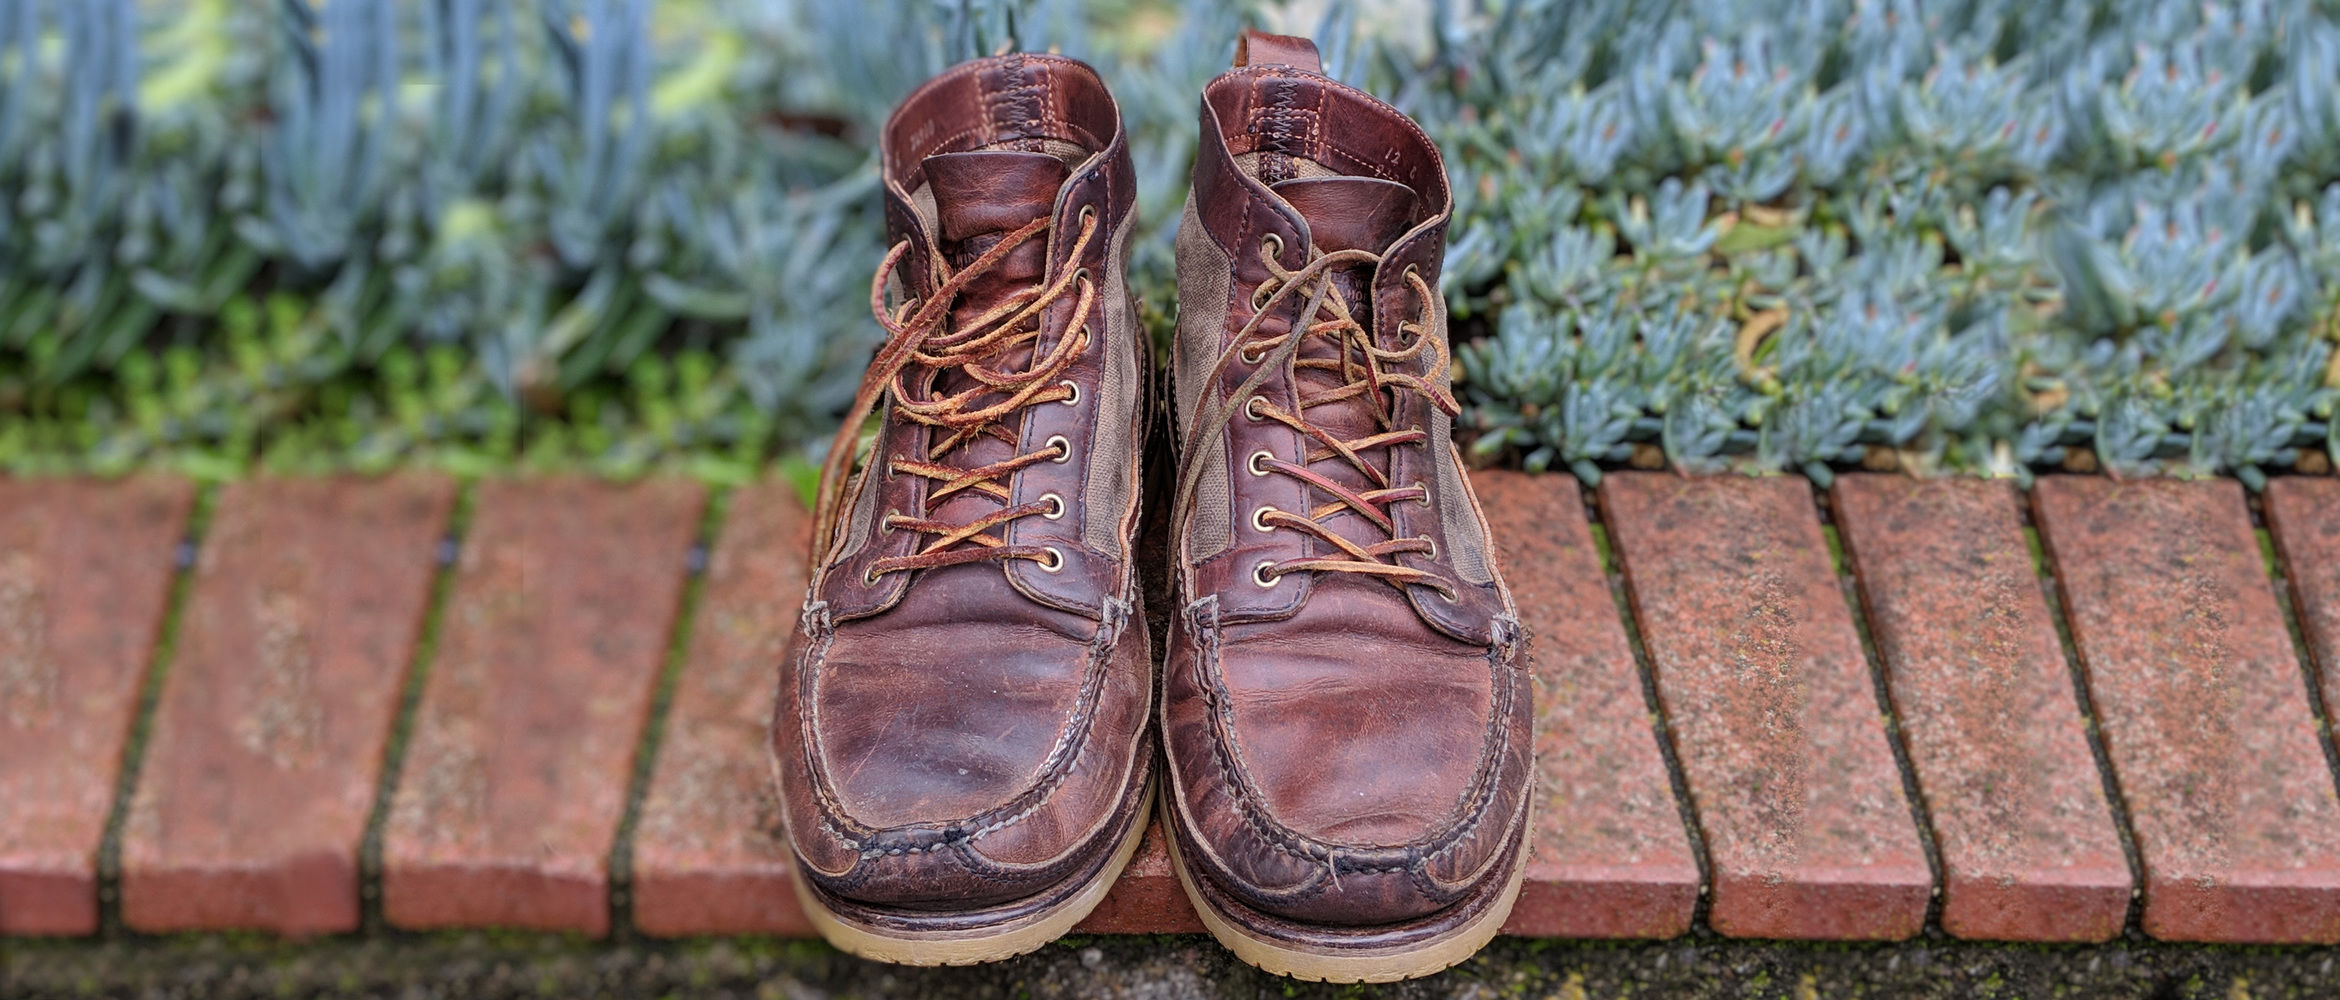 red wing boots in my area